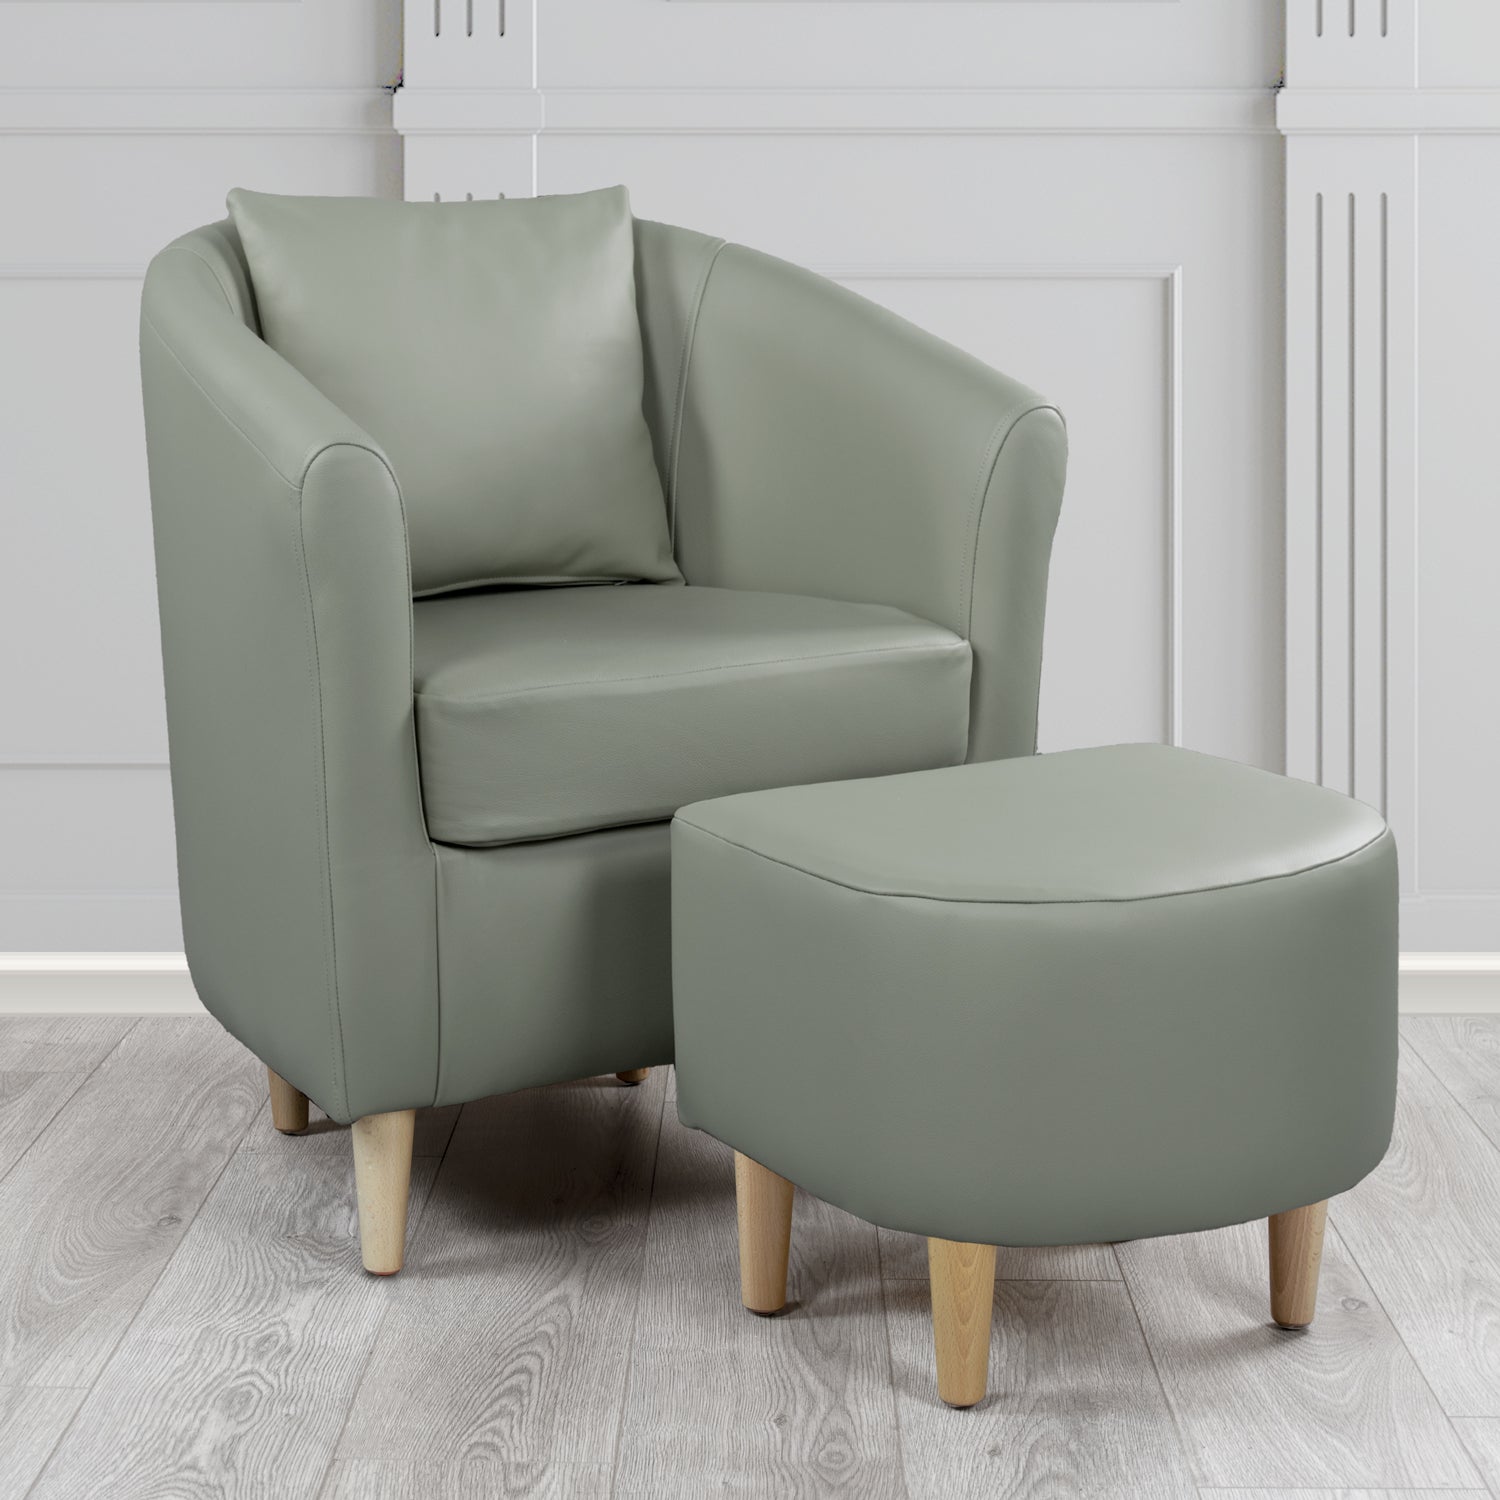 St Tropez Shelly Piping Crib 5 Genuine Leather Tub Chair & Footstool Set With Scatter Cushion (6619513520170)